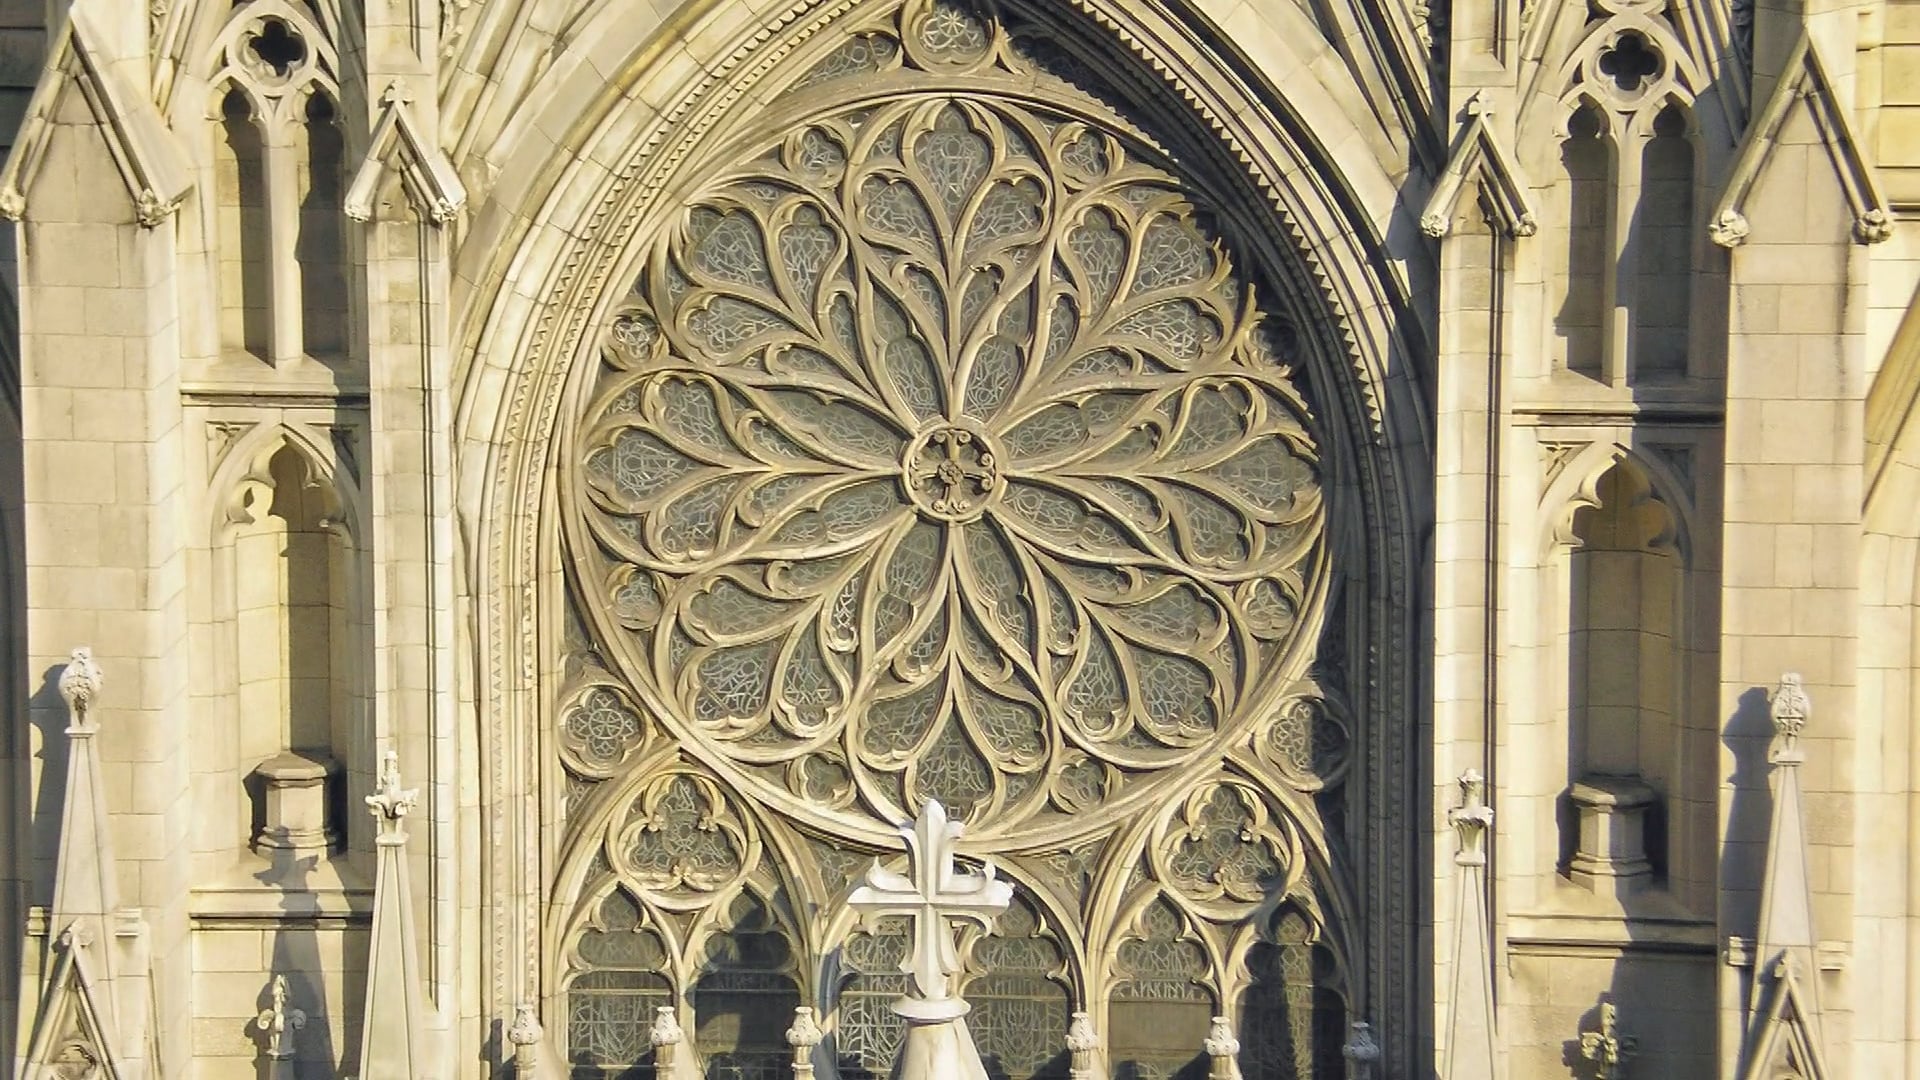 Mass from St. Patrick's Cathedral - May 9, 2022